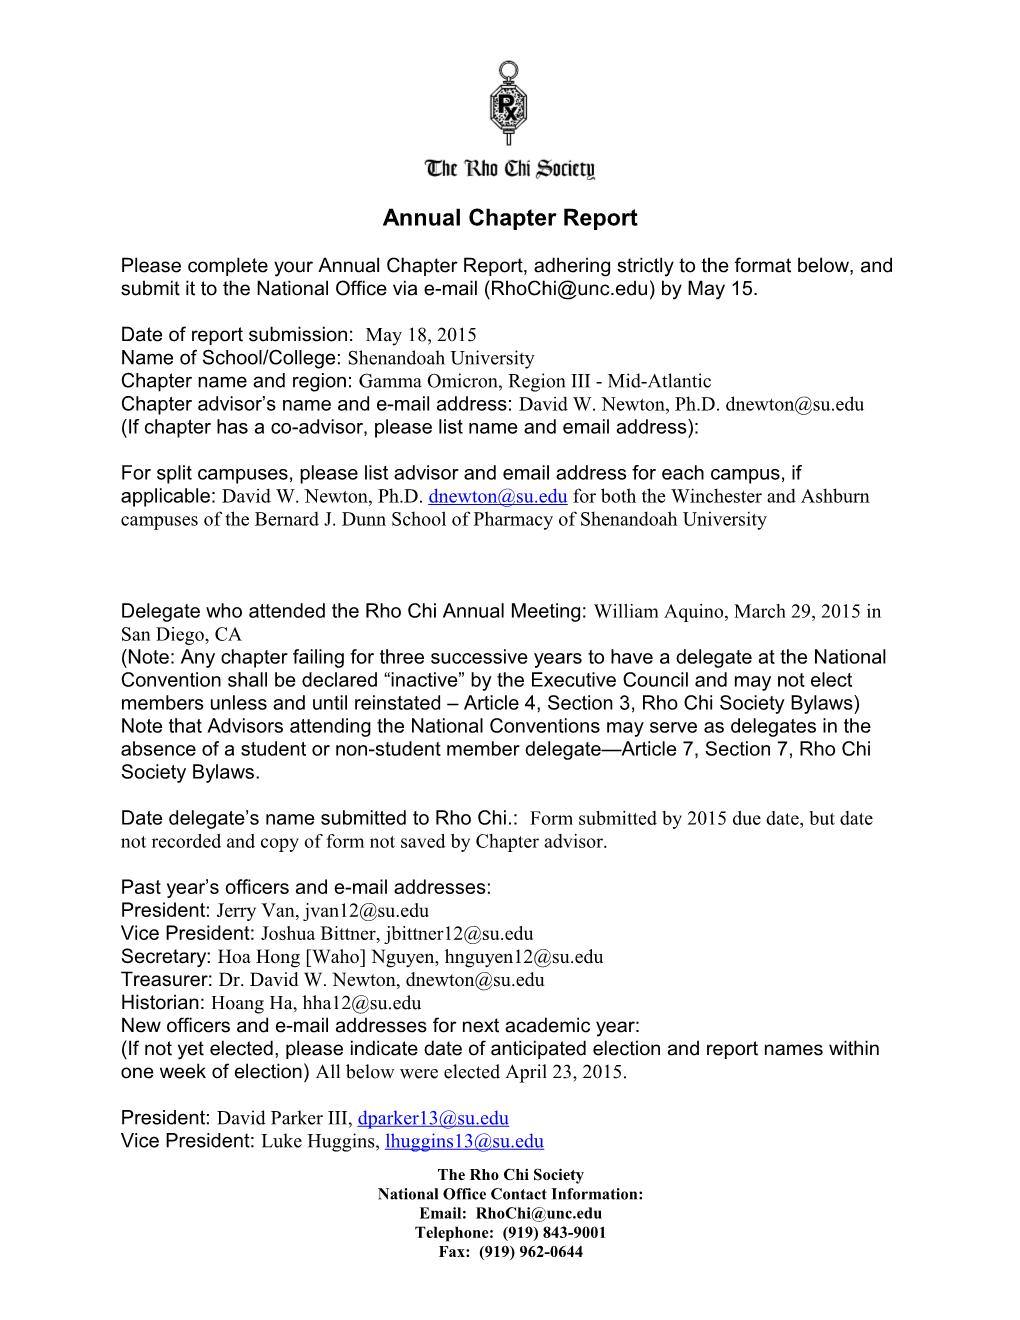 Annual Rho Chi Chapter Report s5